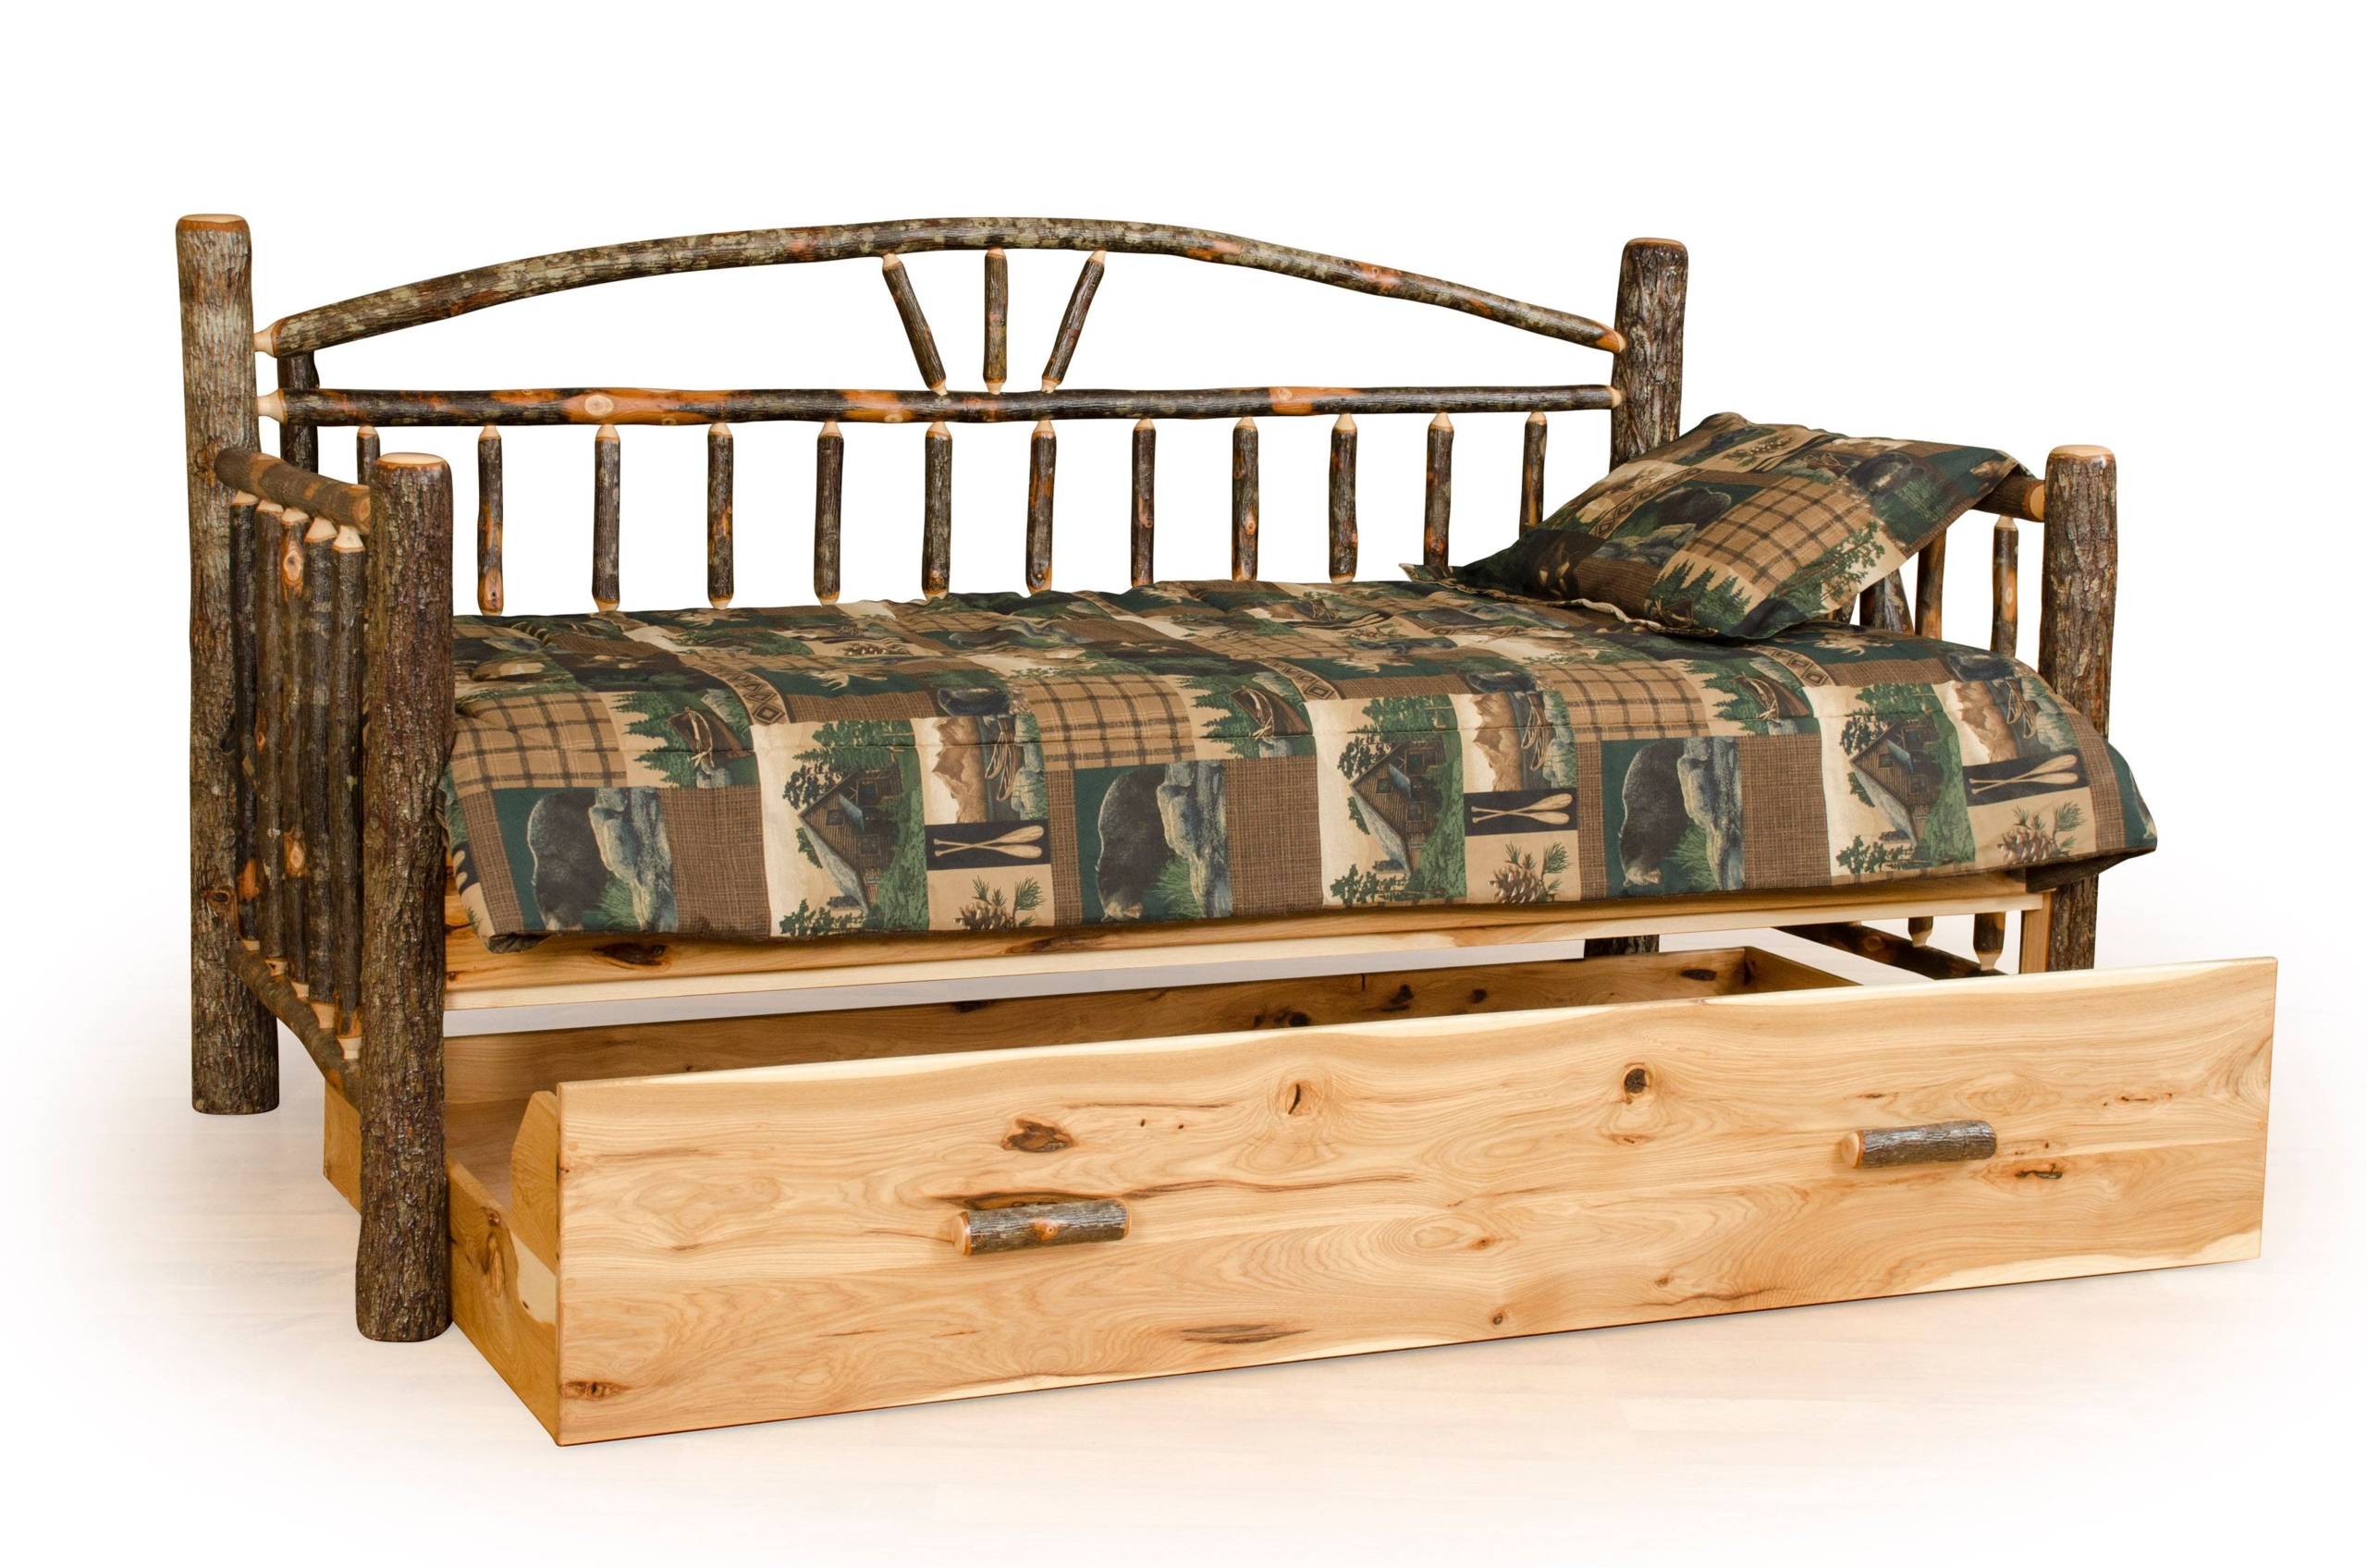 Rustic hickory day bed with trundle